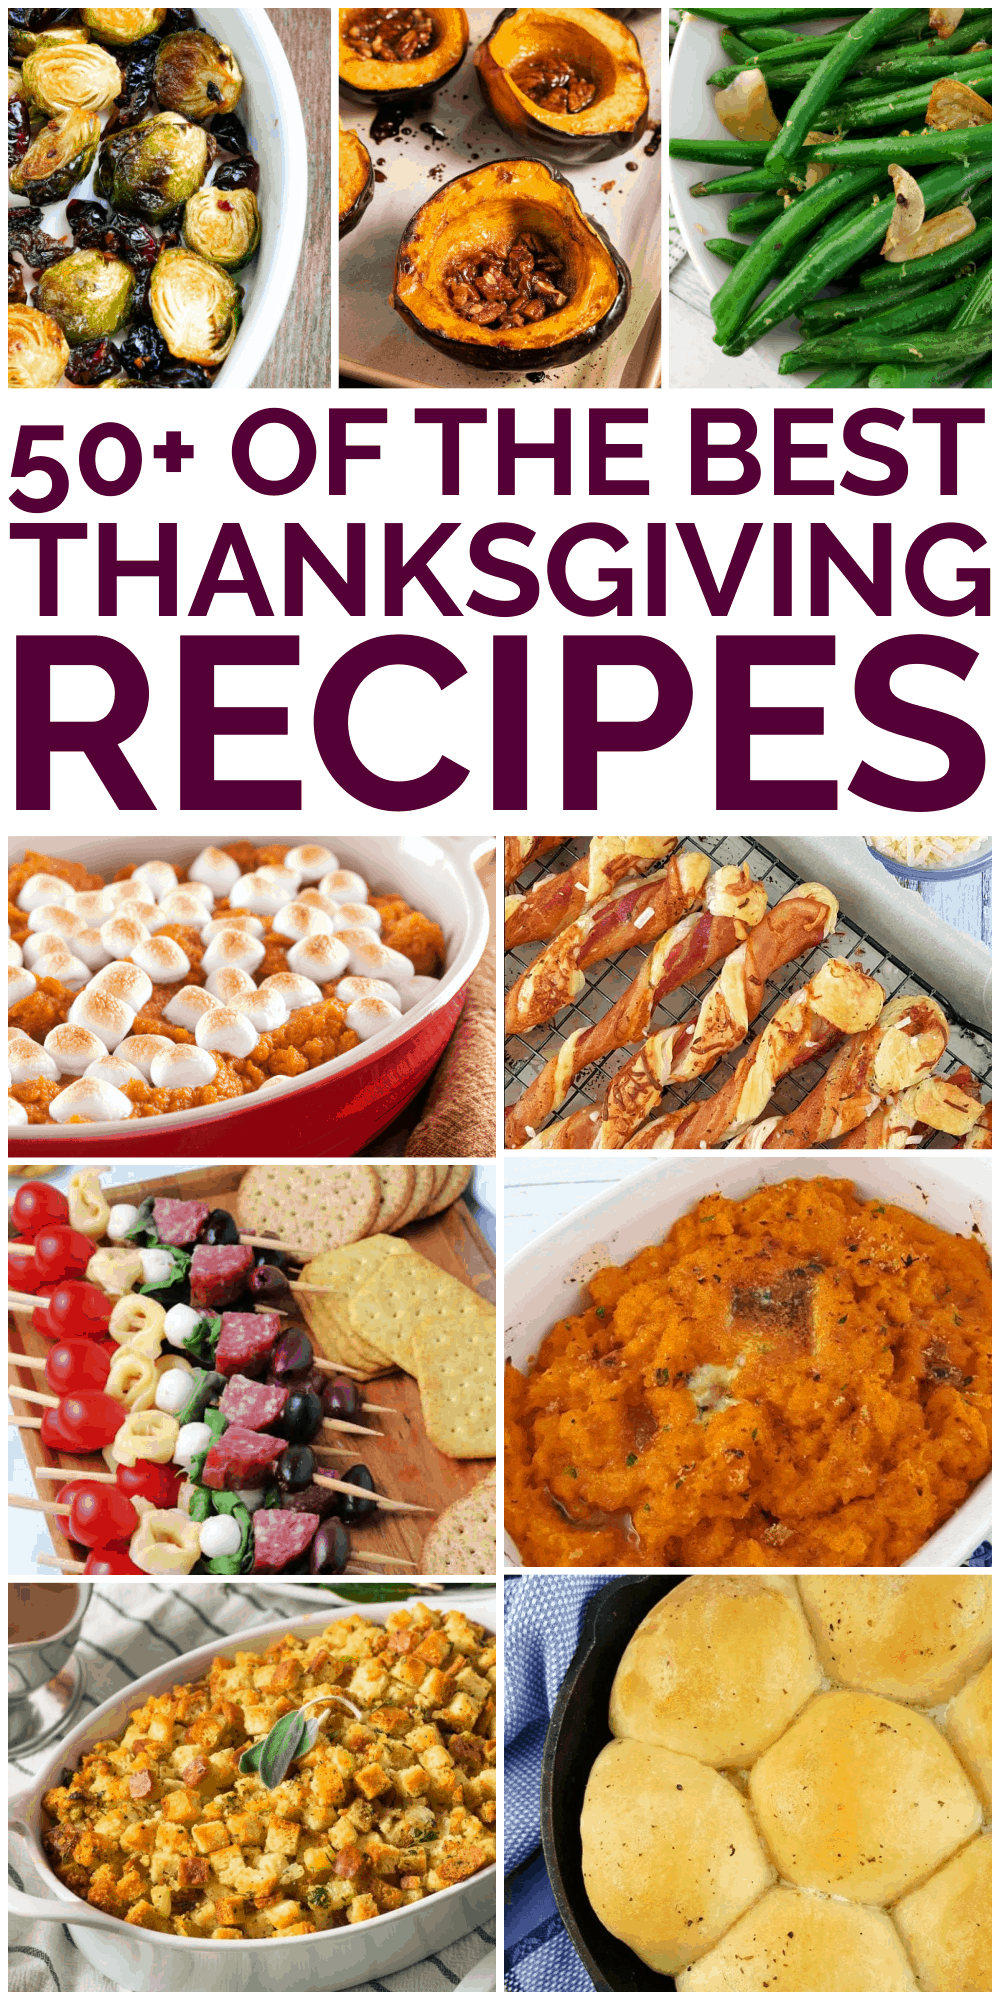 From turkey and stuffing to vegetable side dishes, rolls, and desserts, we have all the Best Thanksgiving Recipes you need this year for the perfect dinner. via @jugglingactmama